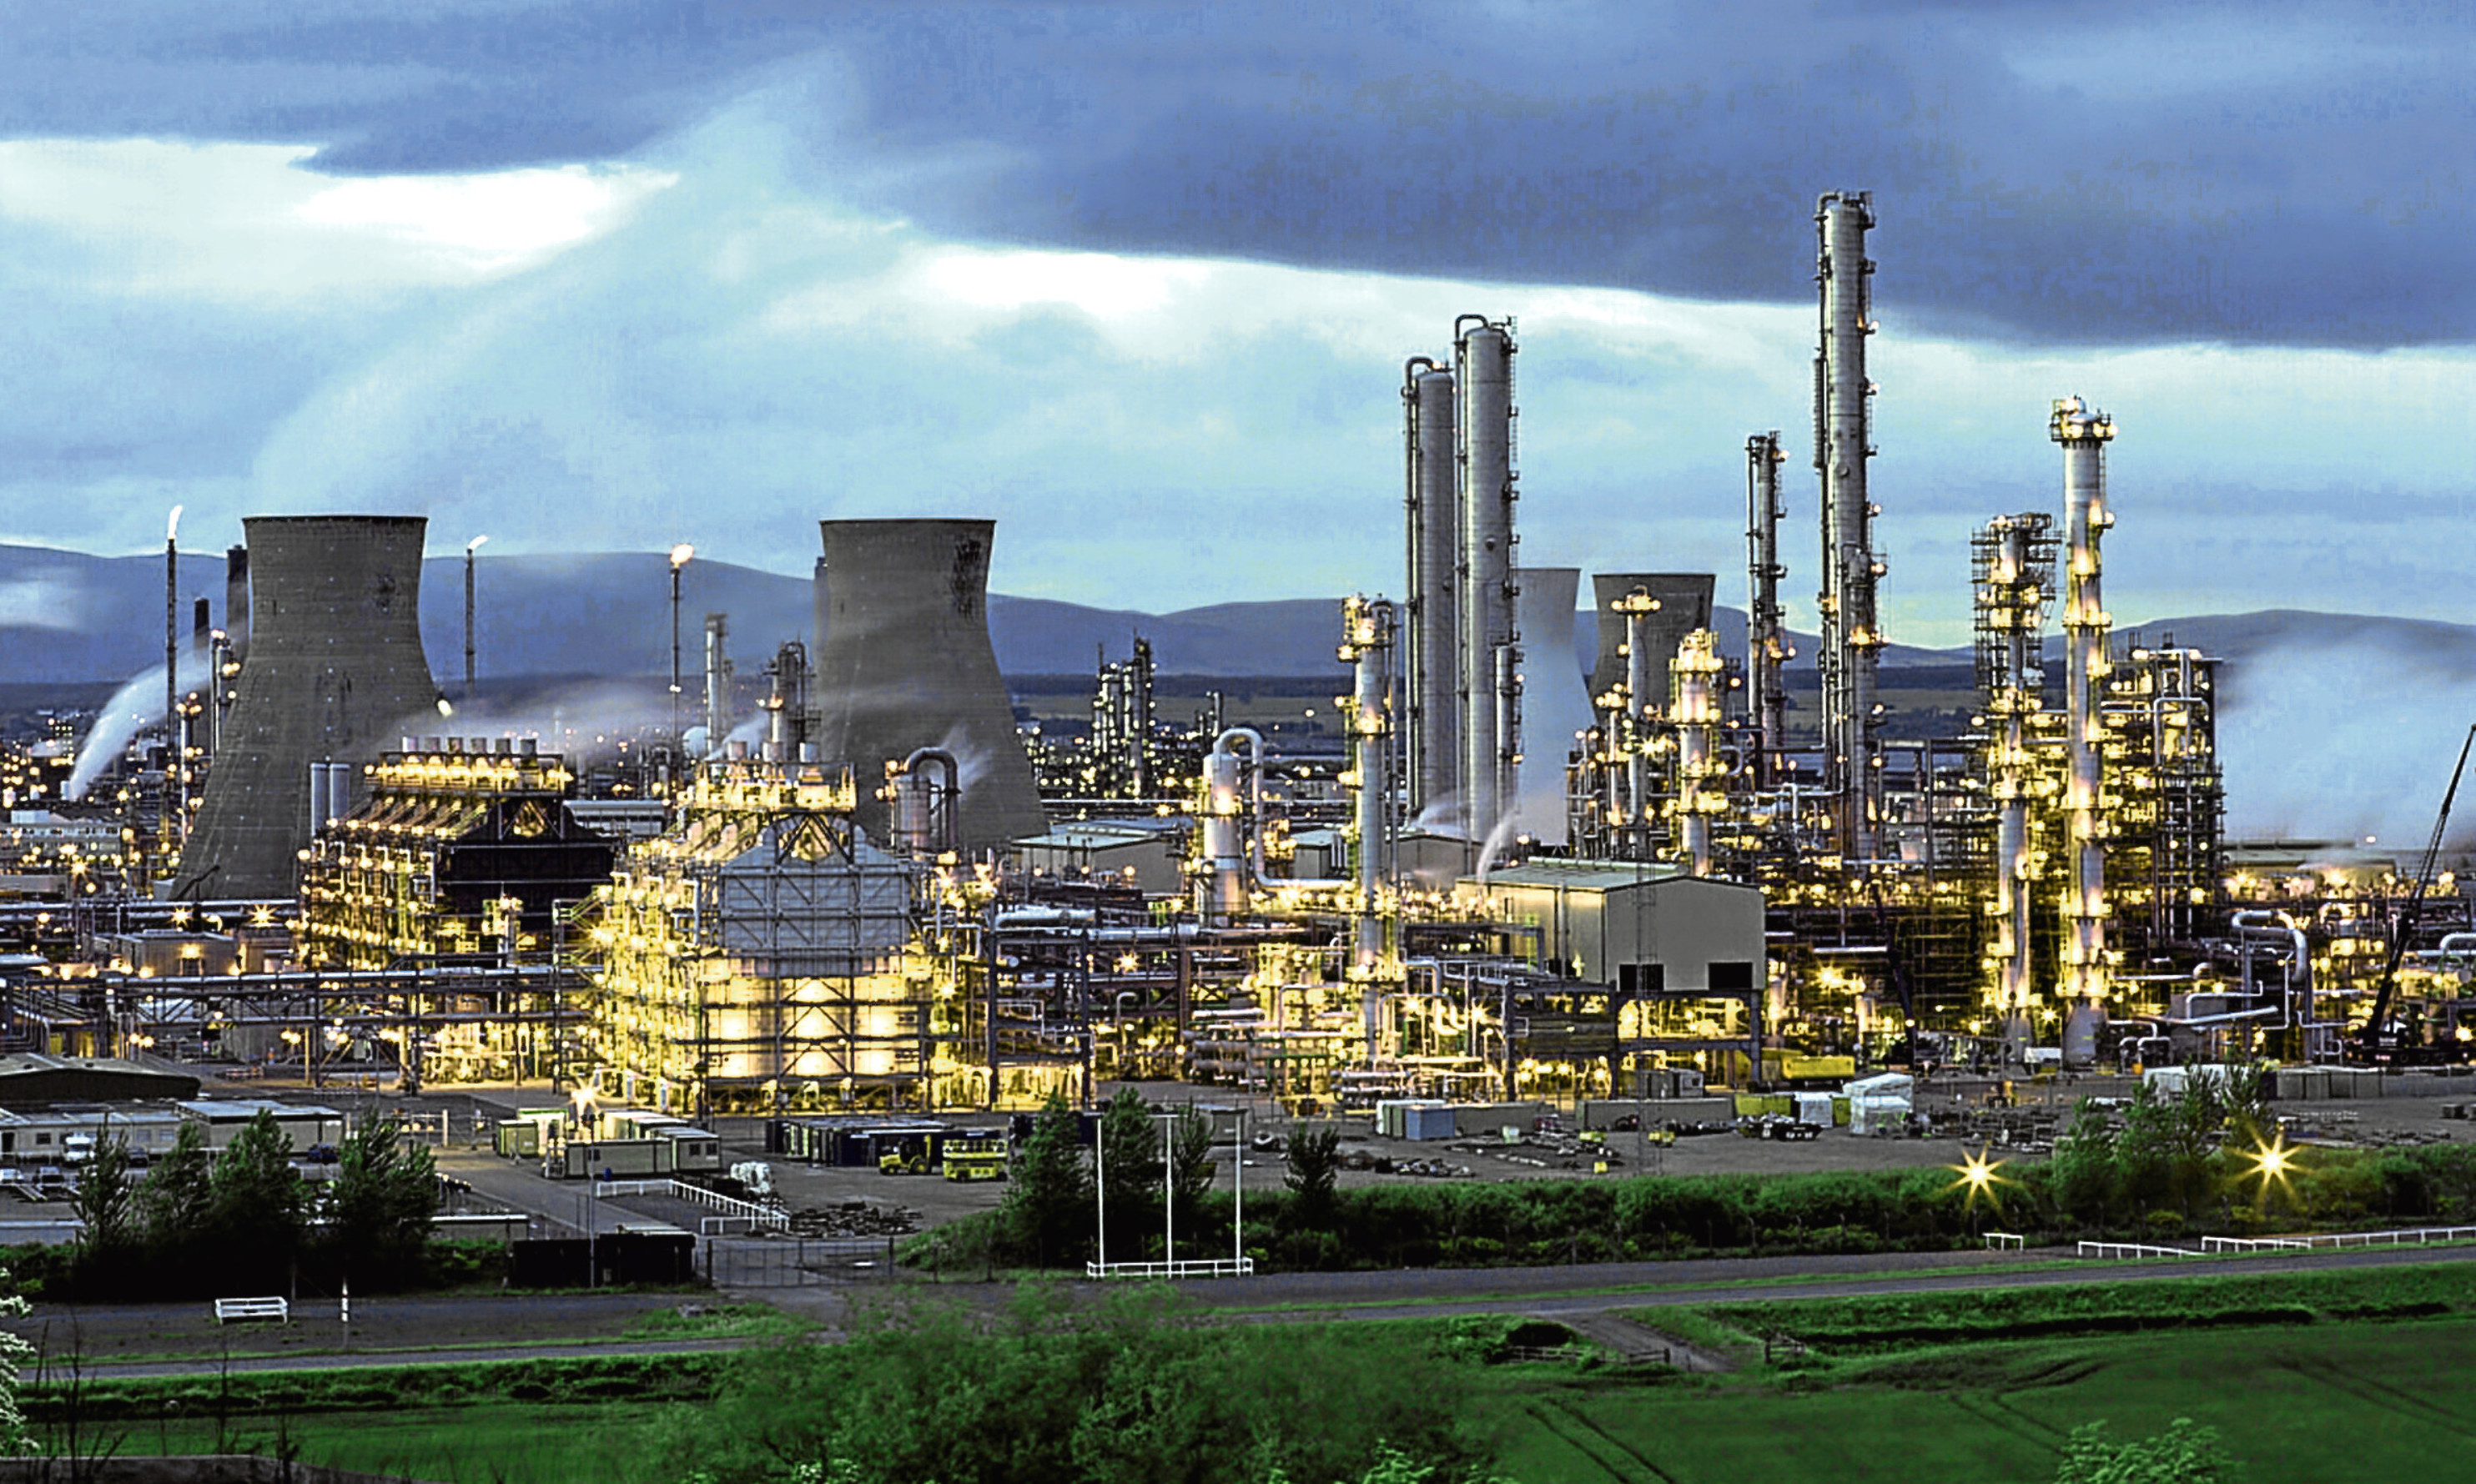 The Ineos-owned refinery at Grangemouth, which employs around 1,300 people.